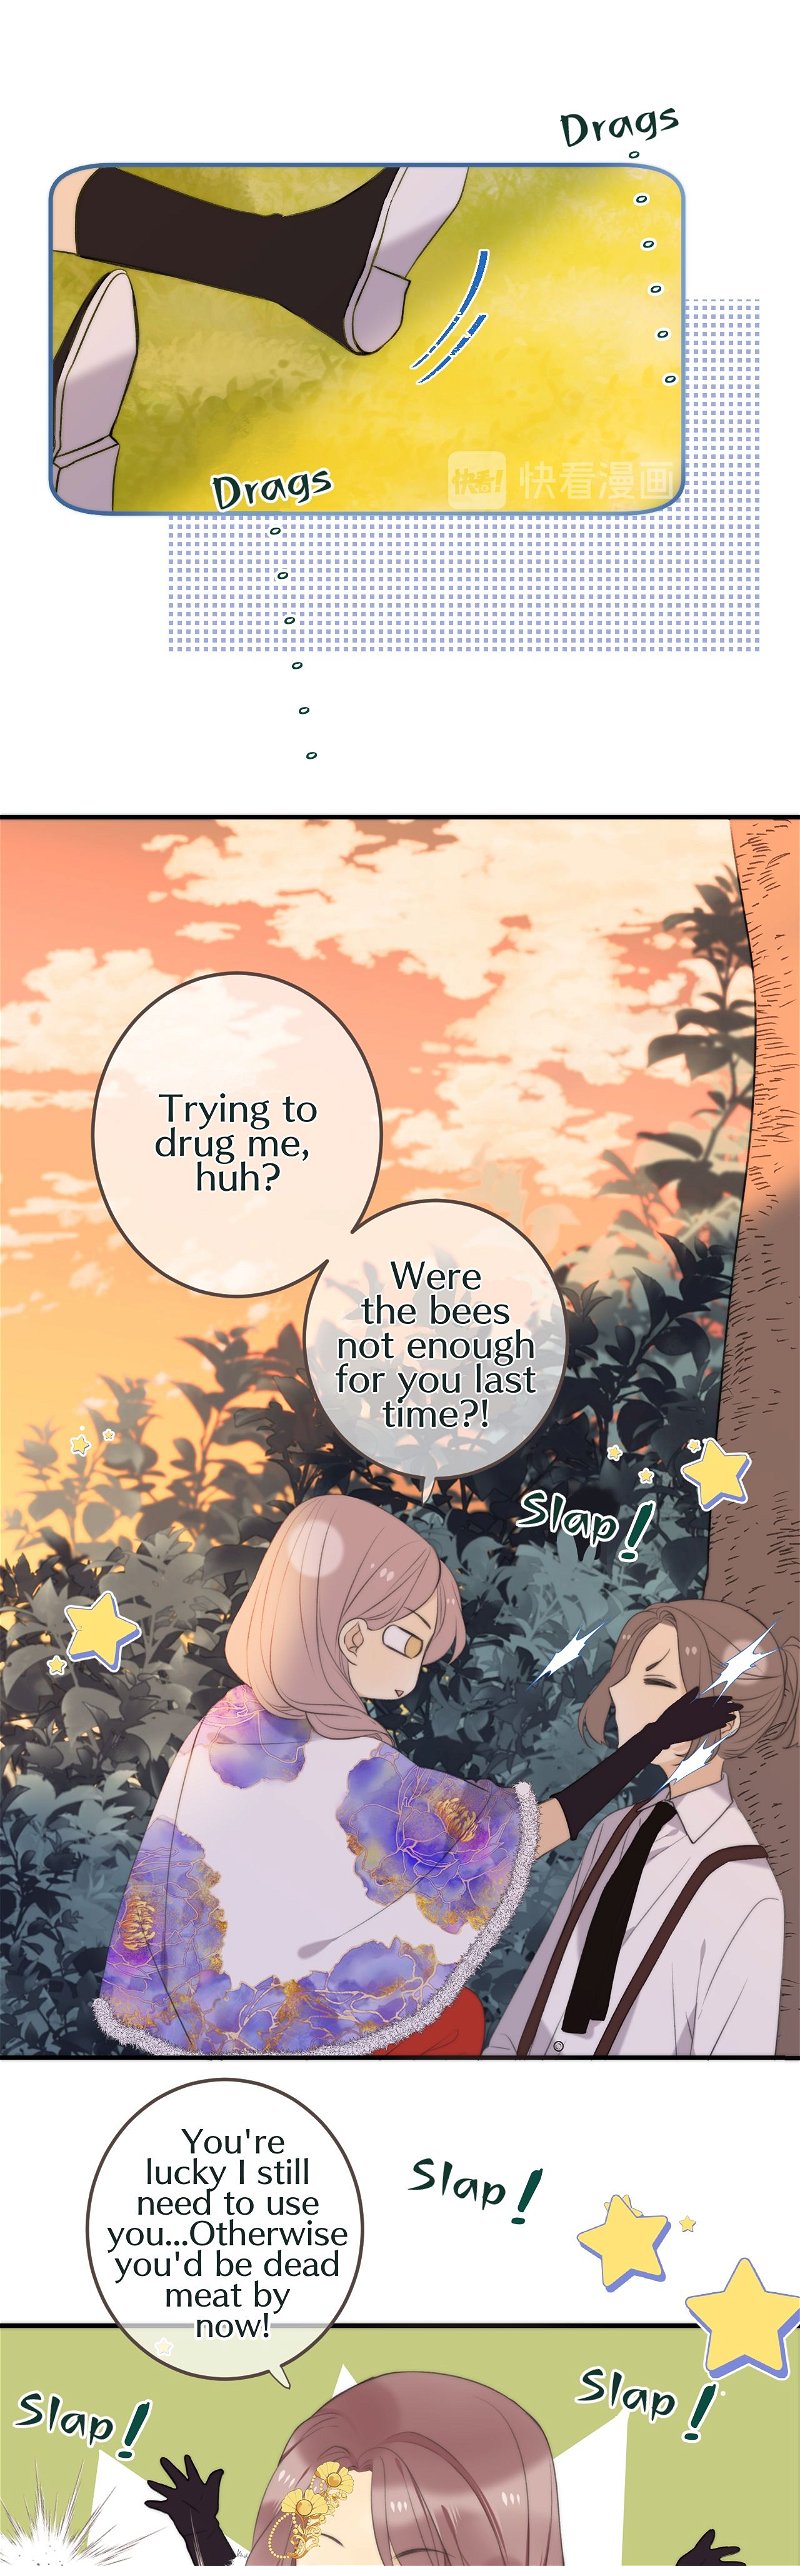 We Meet Again, Miss Lou Chapter 8 - Page 15